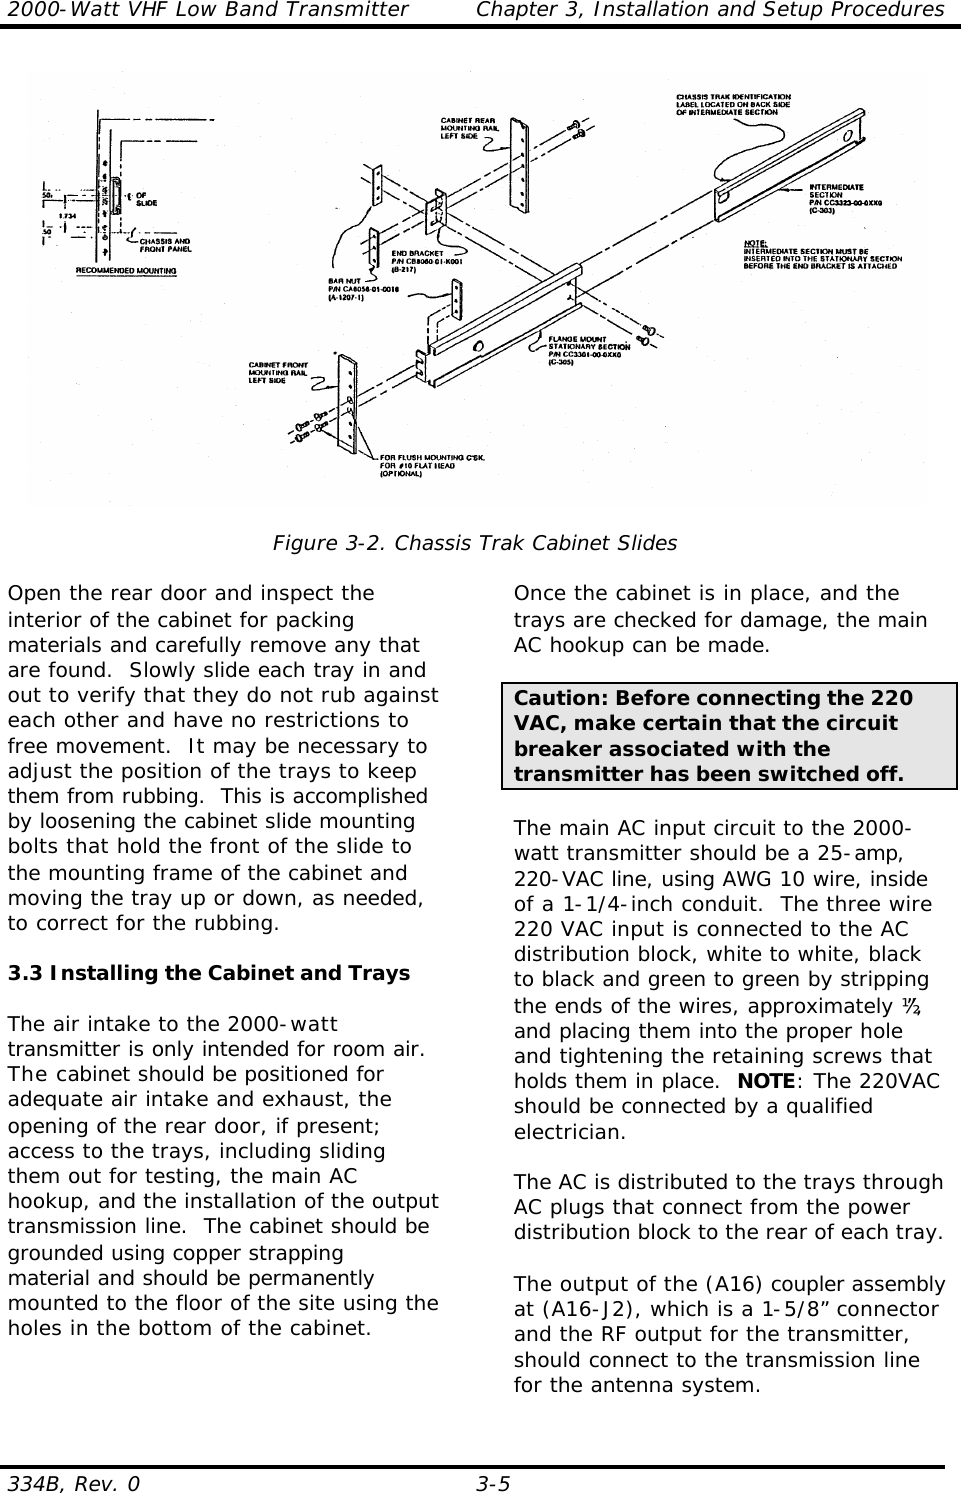 2000-Watt VHF Low Band Transmitter Chapter 3, Installation and Setup Procedures  334B, Rev. 0 3-5     Figure 3-2. Chassis Trak Cabinet Slides  Open the rear door and inspect the interior of the cabinet for packing materials and carefully remove any that are found.  Slowly slide each tray in and out to verify that they do not rub against each other and have no restrictions to free movement.  It may be necessary to adjust the position of the trays to keep them from rubbing.  This is accomplished by loosening the cabinet slide mounting bolts that hold the front of the slide to the mounting frame of the cabinet and moving the tray up or down, as needed, to correct for the rubbing.  3.3 Installing the Cabinet and Trays  The air intake to the 2000-watt transmitter is only intended for room air. The cabinet should be positioned for adequate air intake and exhaust, the opening of the rear door, if present; access to the trays, including sliding them out for testing, the main AC hookup, and the installation of the output transmission line.  The cabinet should be grounded using copper strapping material and should be permanently mounted to the floor of the site using the holes in the bottom of the cabinet.  Once the cabinet is in place, and the trays are checked for damage, the main AC hookup can be made.    Caution: Before connecting the 220 VAC, make certain that the circuit breaker associated with the transmitter has been switched off.    The main AC input circuit to the 2000-watt transmitter should be a 25-amp, 220-VAC line, using AWG 10 wire, inside of a 1-1/4-inch conduit.  The three wire 220 VAC input is connected to the AC distribution block, white to white, black to black and green to green by stripping the ends of the wires, approximately ½”, and placing them into the proper hole and tightening the retaining screws that holds them in place.  NOTE: The 220VAC should be connected by a qualified electrician.  The AC is distributed to the trays through AC plugs that connect from the power distribution block to the rear of each tray.  The output of the (A16) coupler assembly at (A16-J2), which is a 1-5/8” connector and the RF output for the transmitter, should connect to the transmission line for the antenna system. 